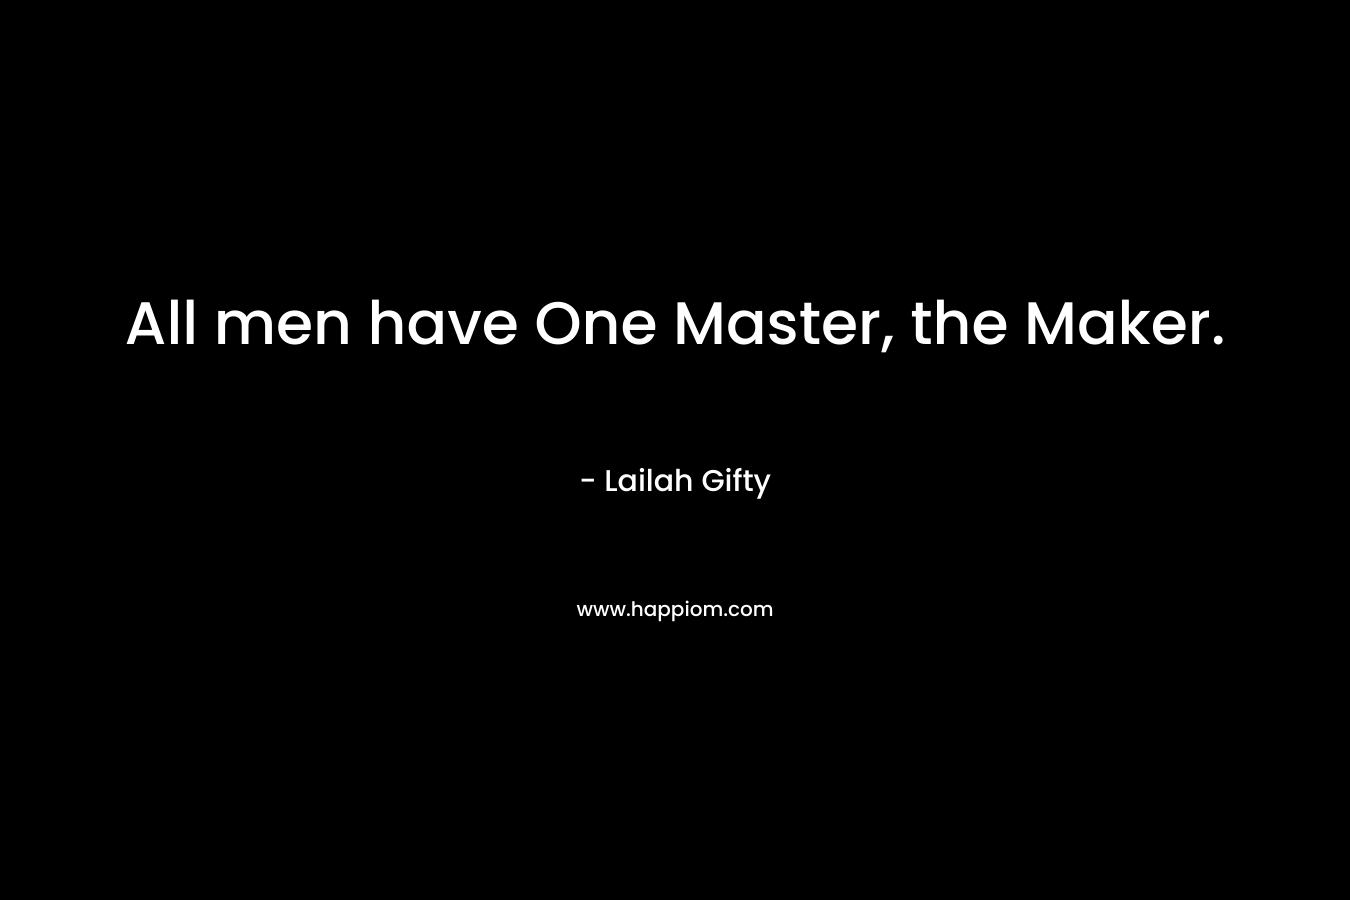 All men have One Master, the Maker.